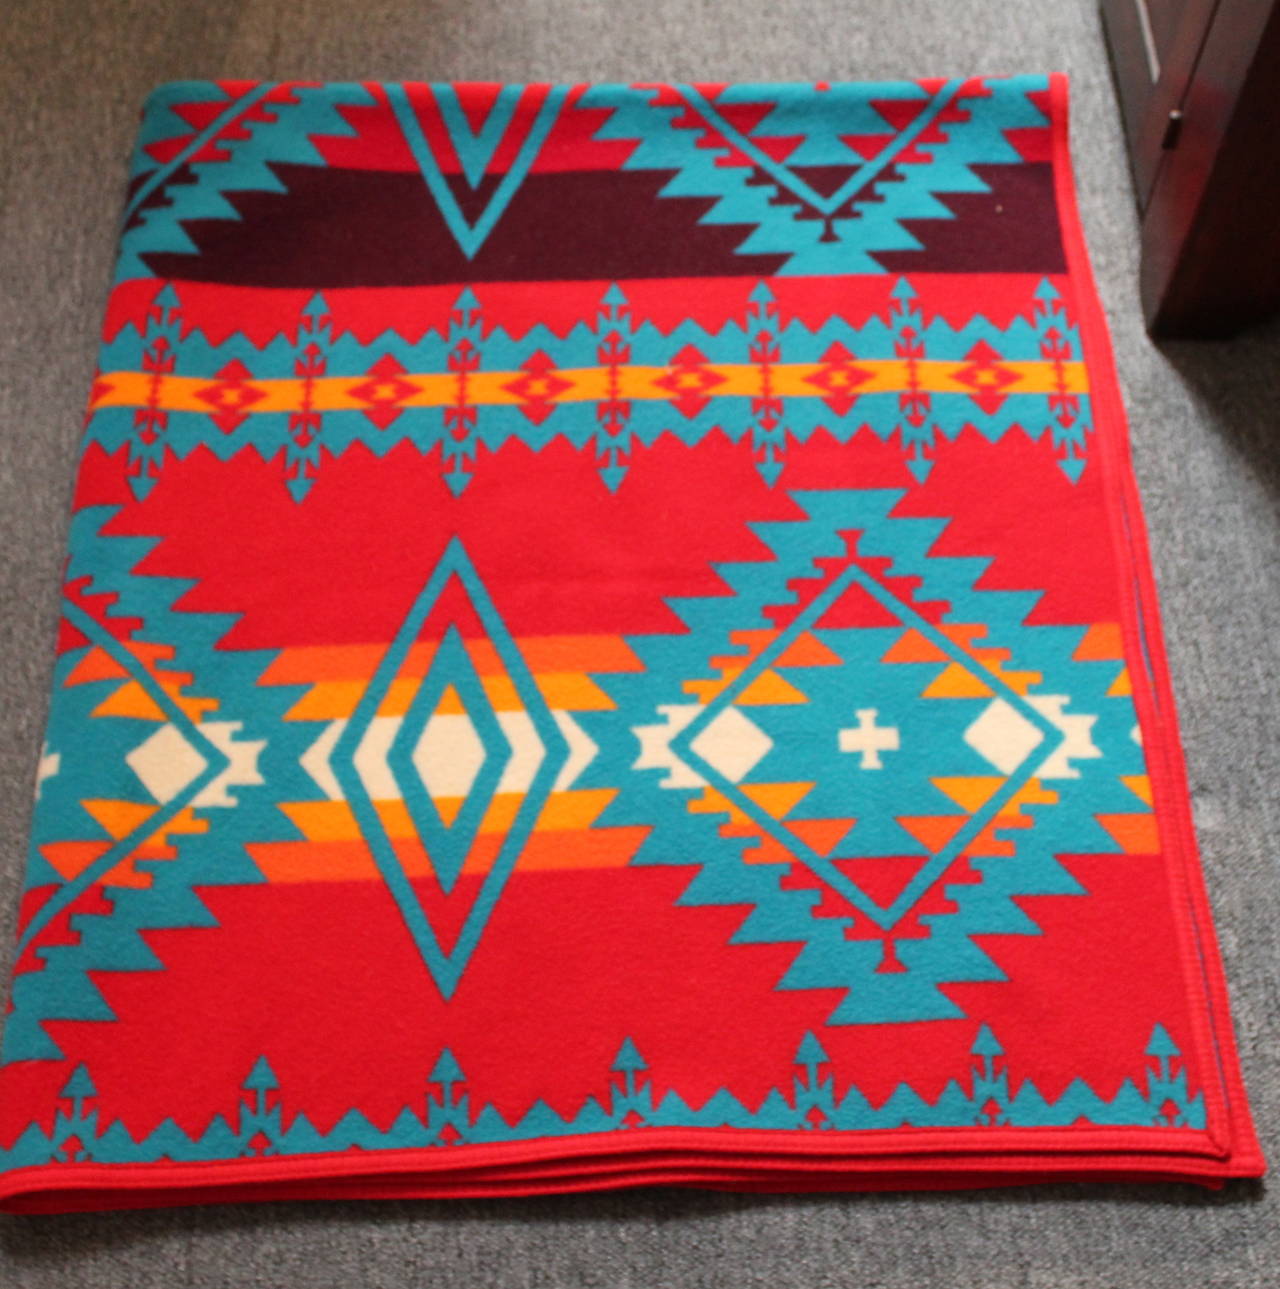 This Pendleton or Beaver State wool camp blanket is in great condition and has wonderful vibrant colors. It retains the original label. This is a full or queen size.